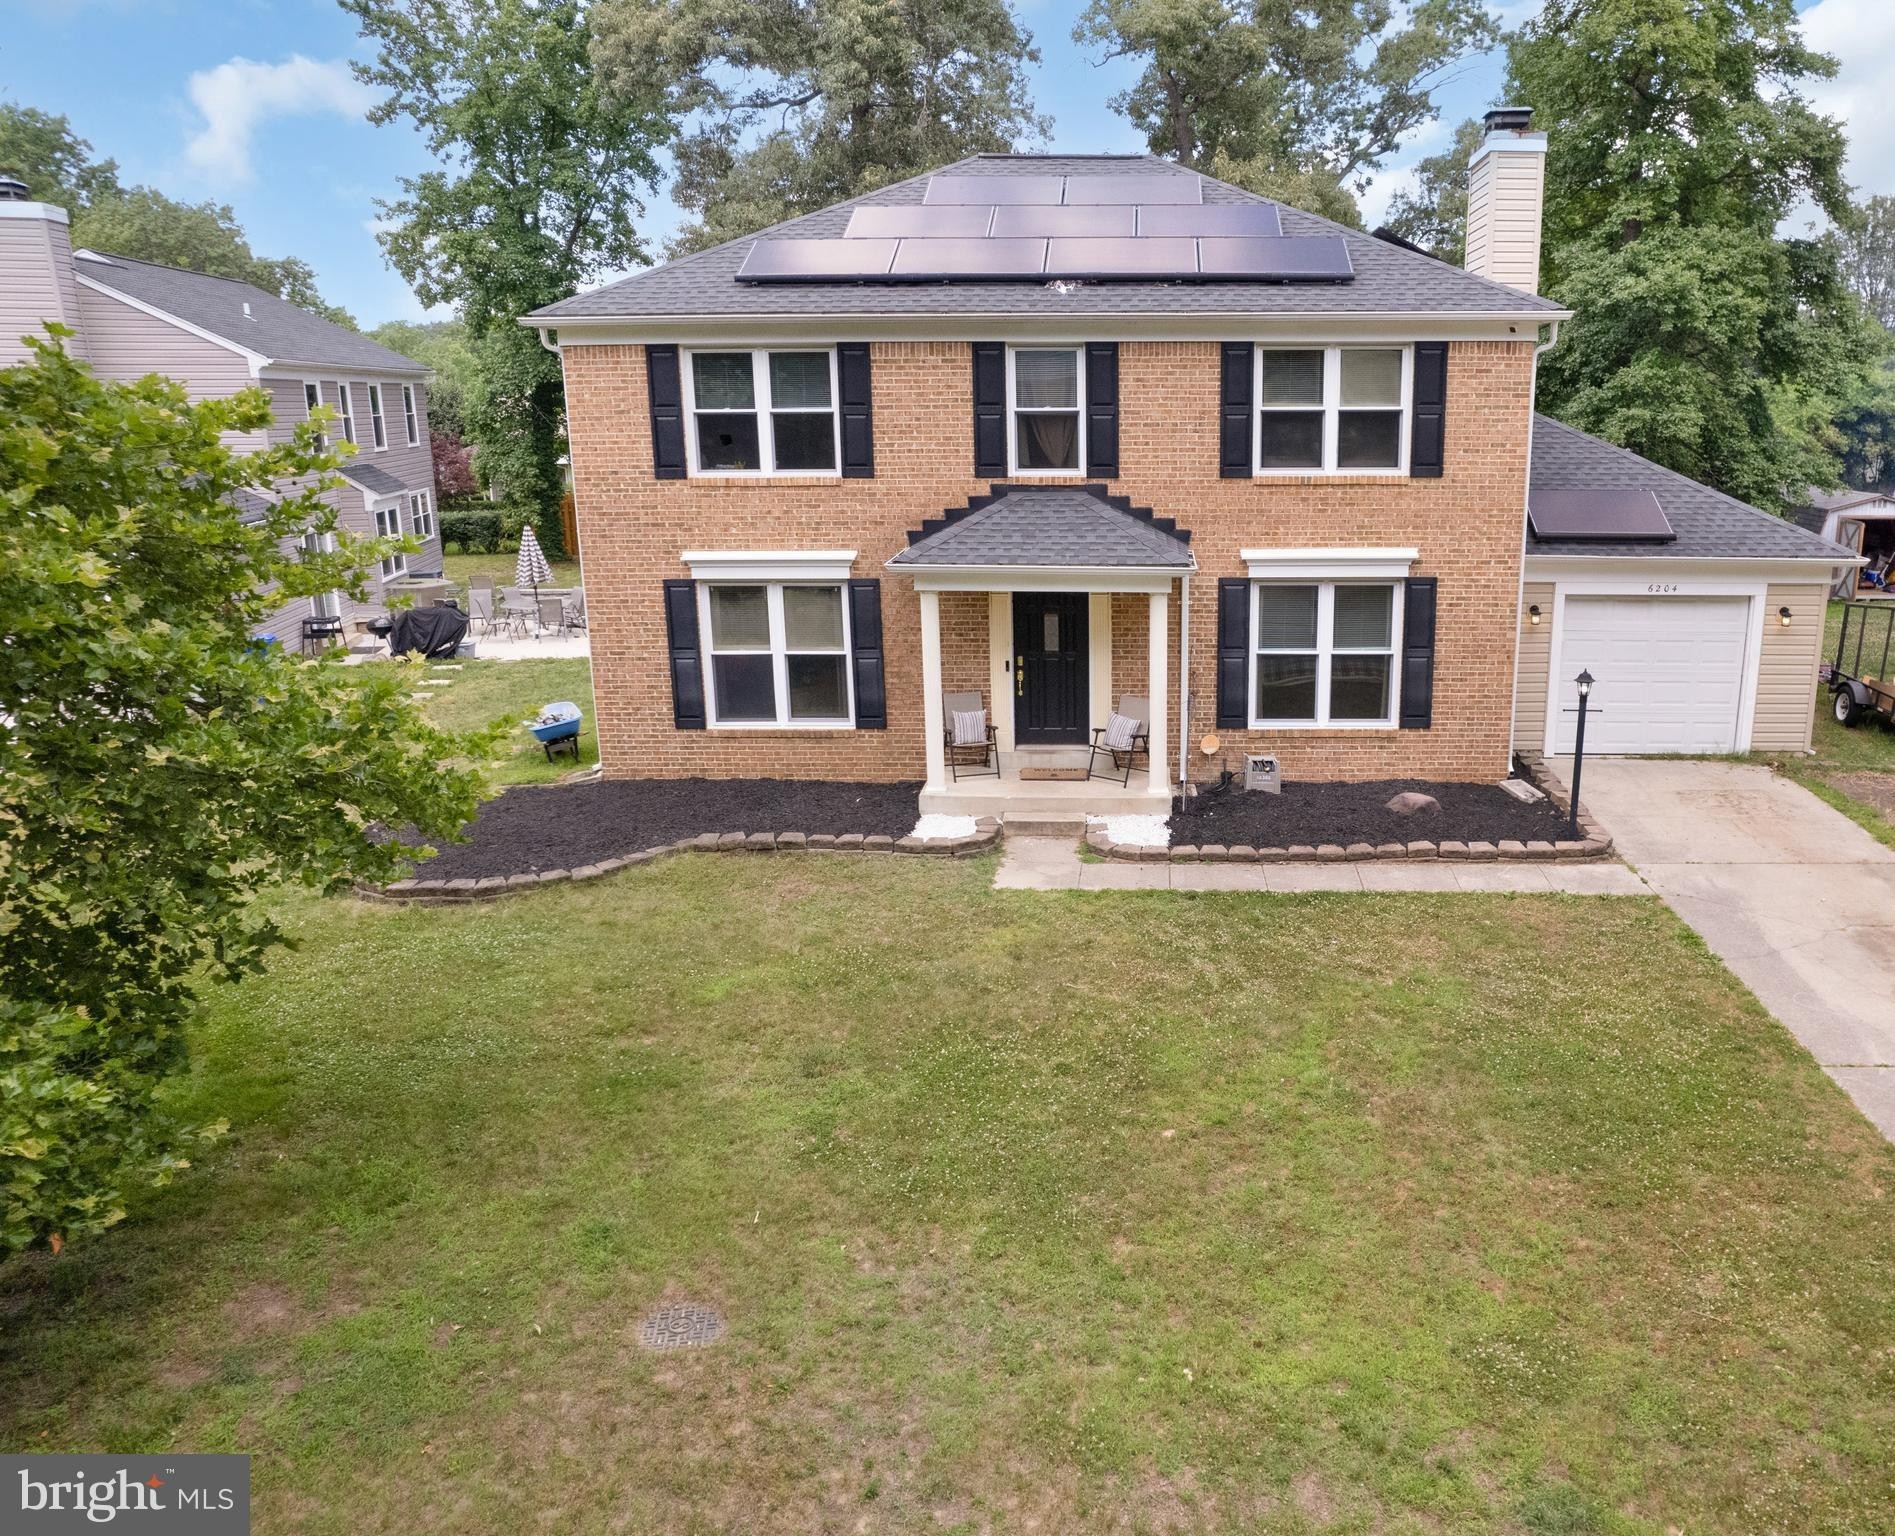 1. 6204 Panther Court